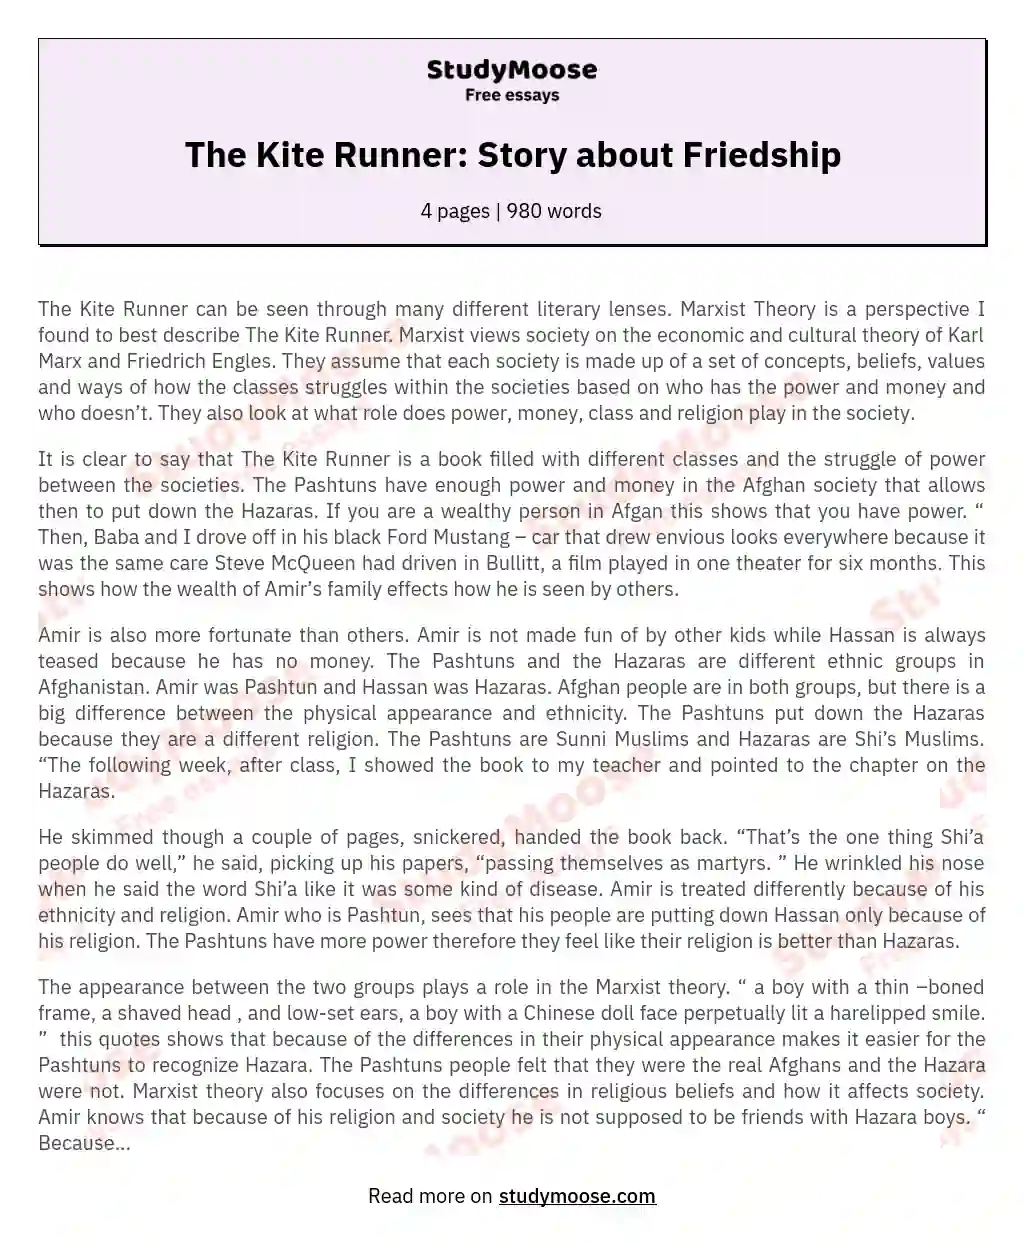 The Kite Runner: Story about Friedship essay